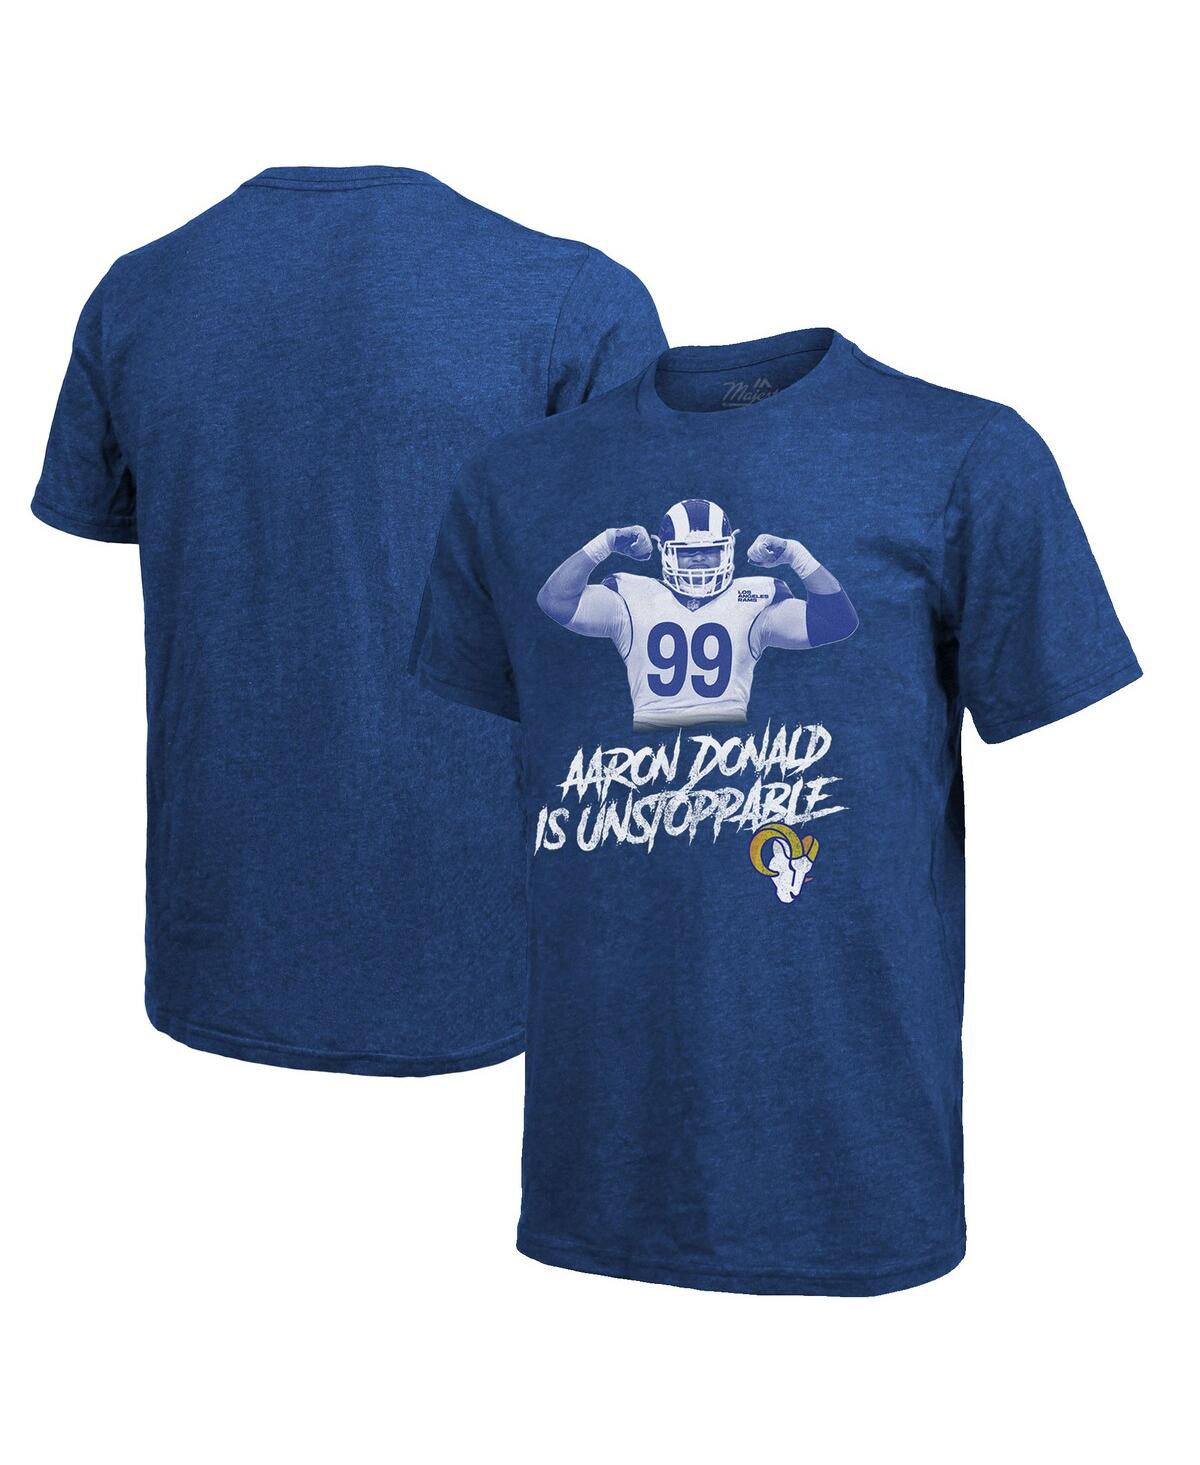 Men's Majestic Threads Aaron Donald Royal Los Angeles Rams Tri-Blend Player T-shirt - Royal